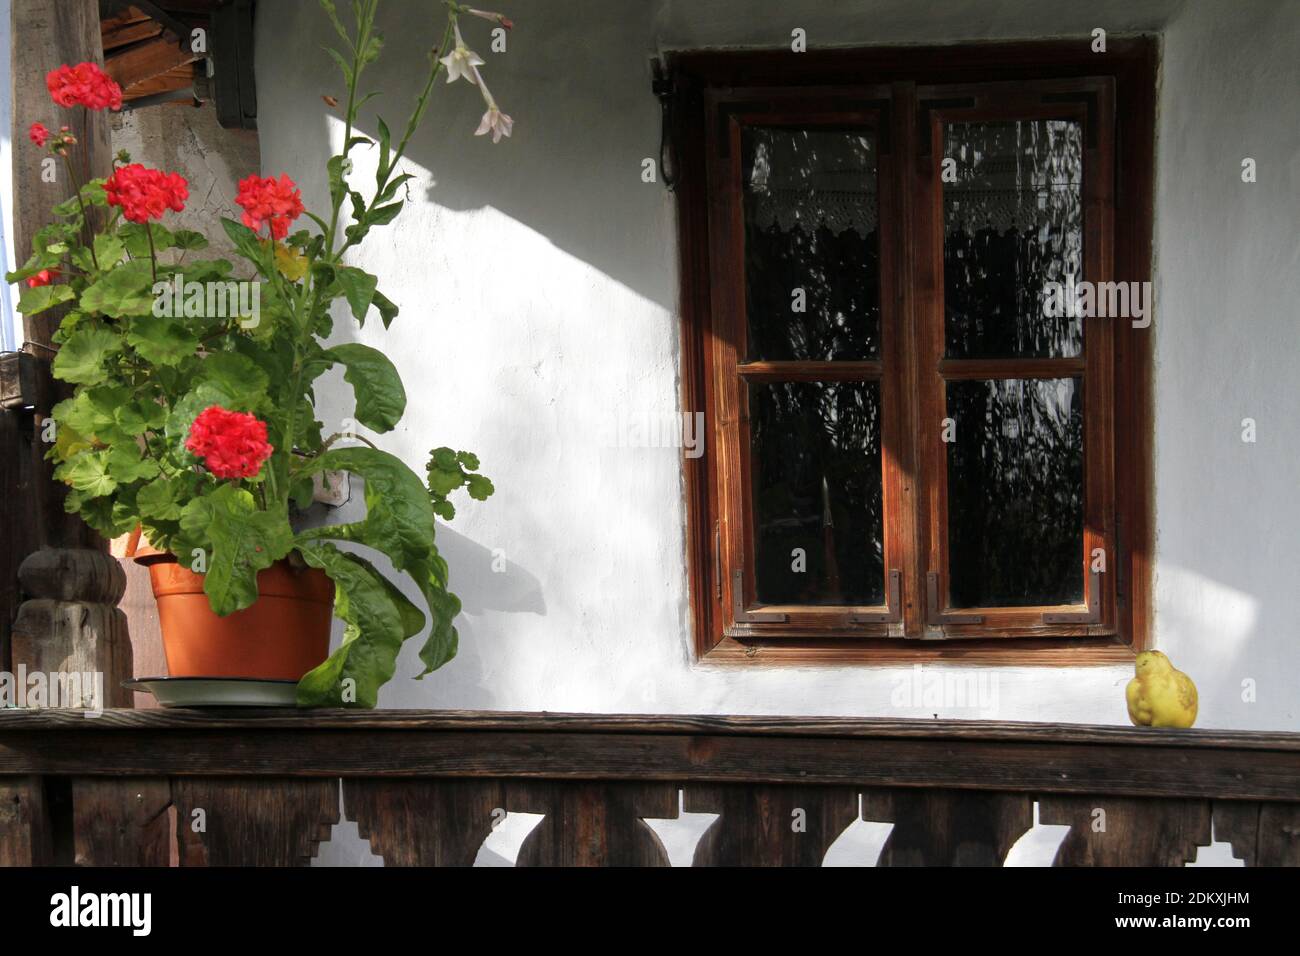 Vrancea County, Romania. Wooden frame window of an old traditional house. Potted flowers on the wooden porch. Stock Photo